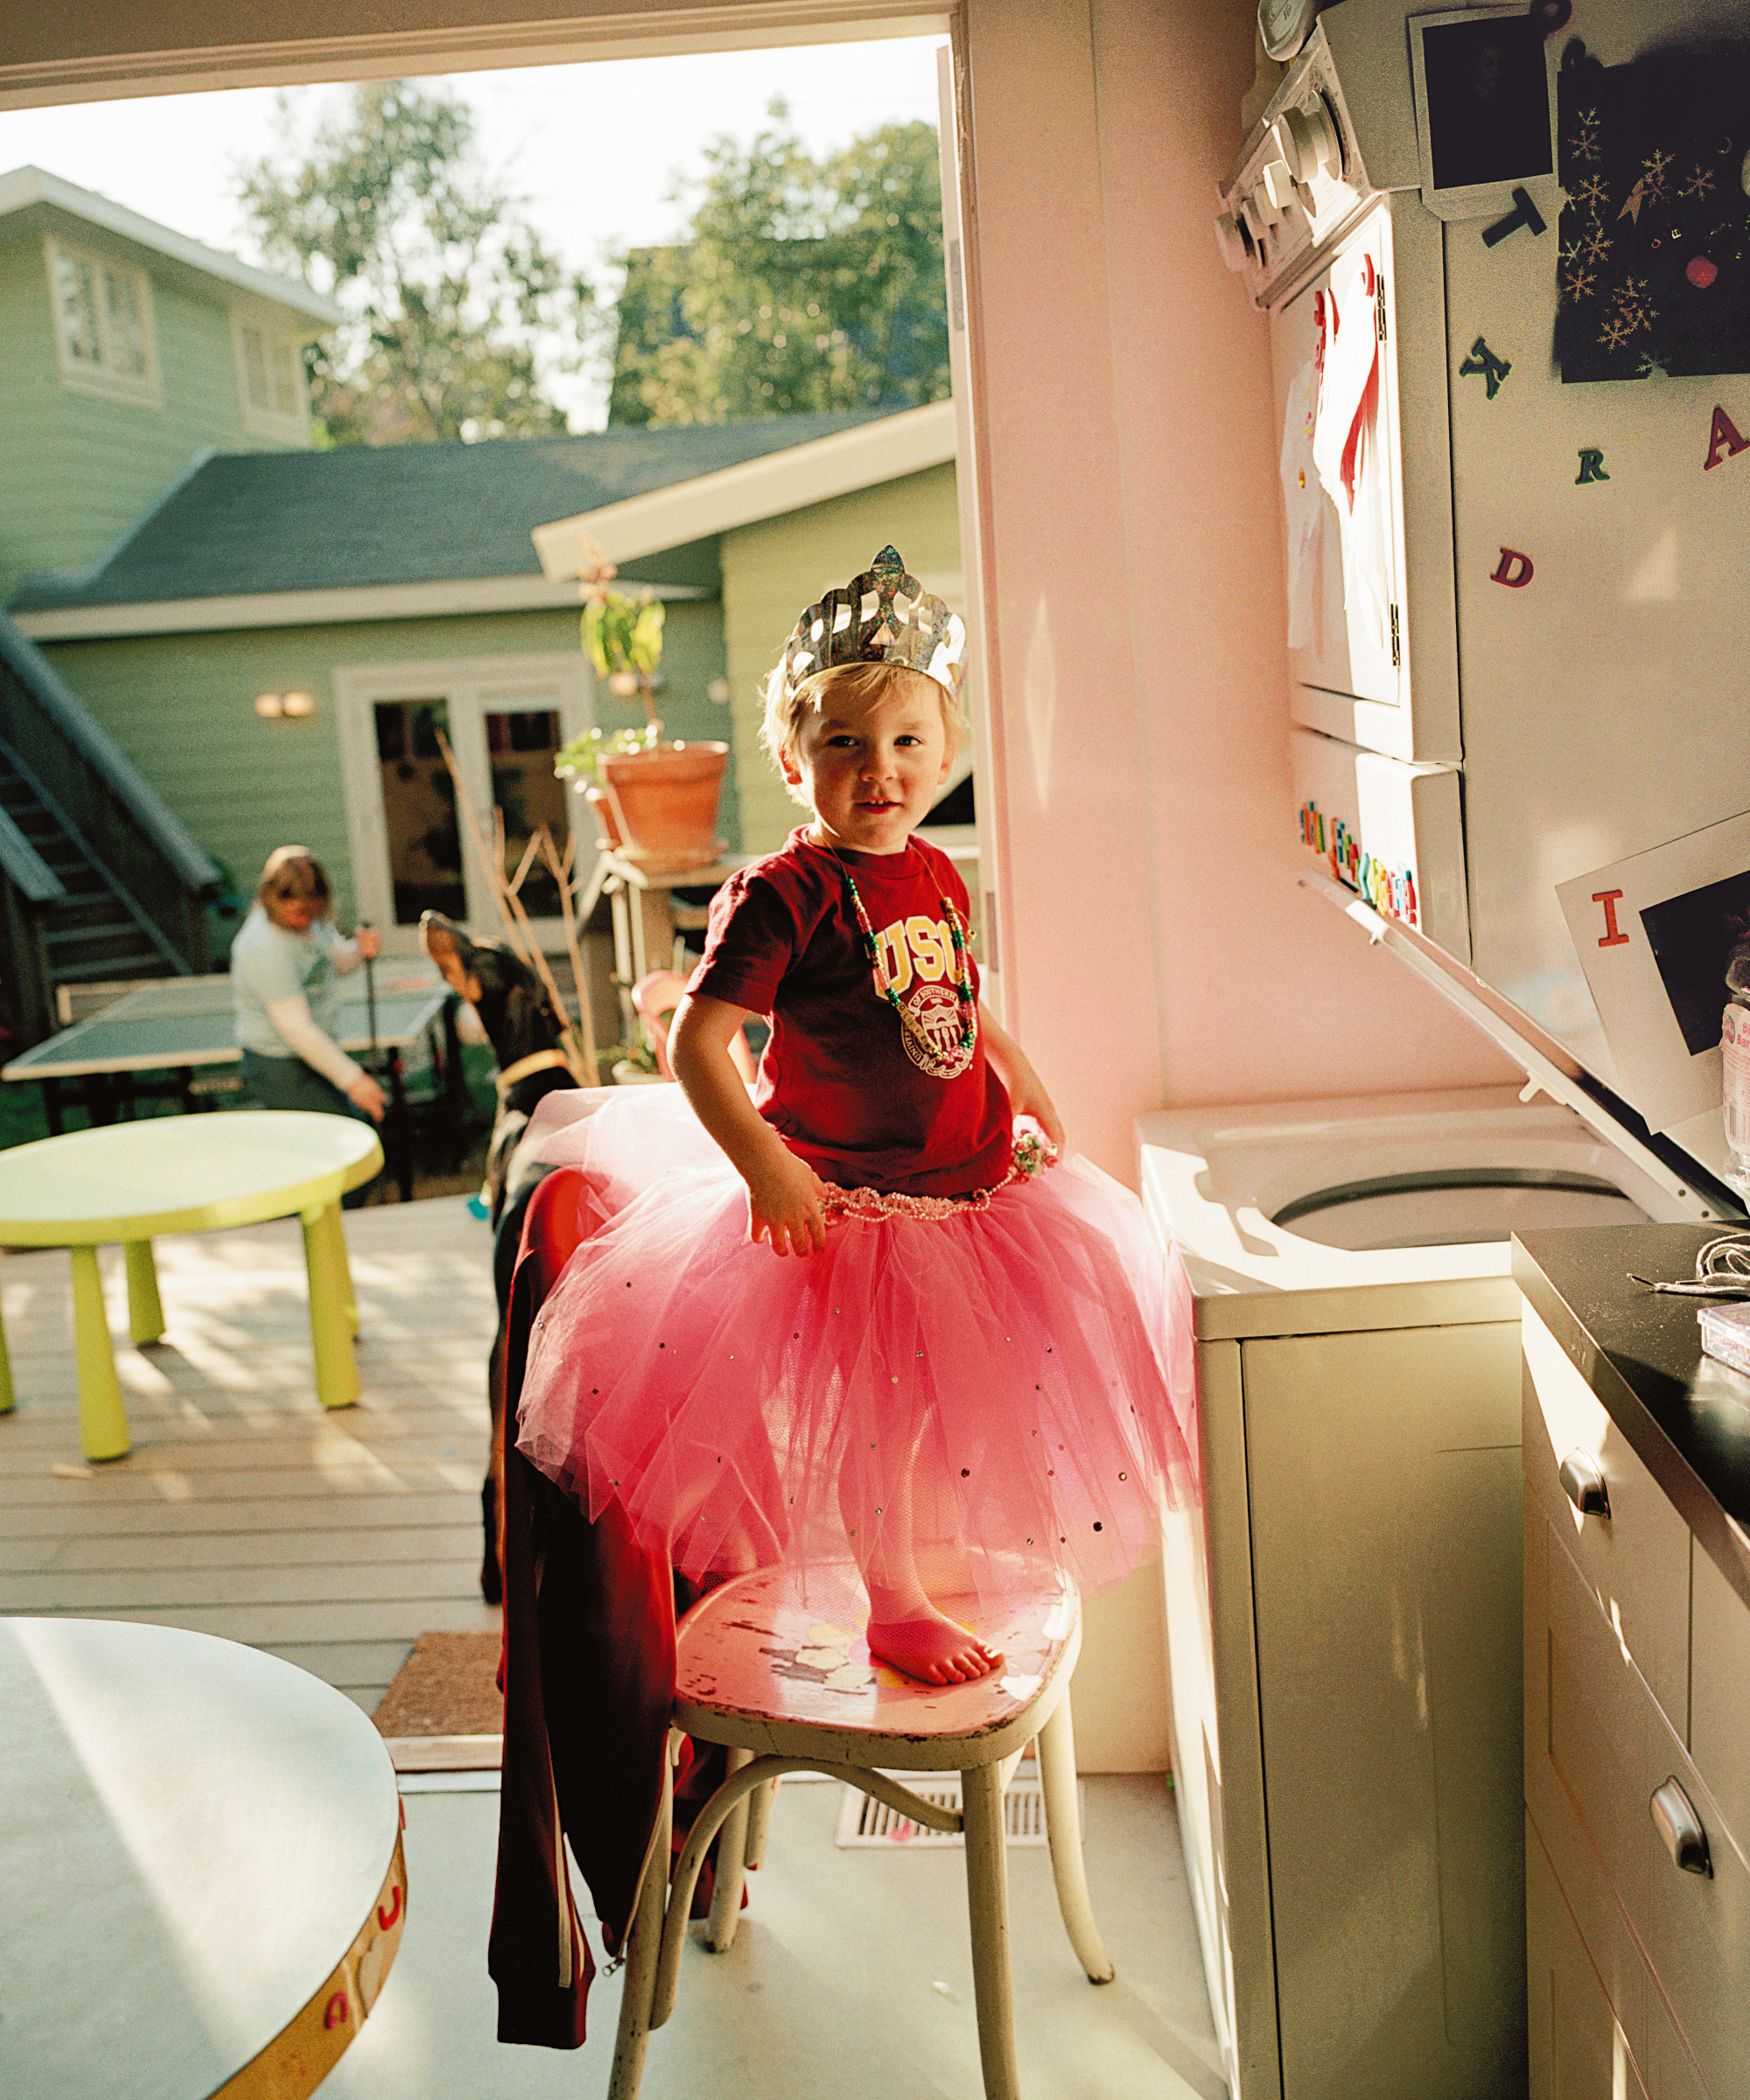 Oliver in a Tutu, 2004. Chromogenic print, 24 × 20 in. (61 × 50.8 cm). Picture credit: courtesy the artist and Regen Projects, Los Angeles; Lehmann Maupin, New York/Hong Kong/Seoul/London; Thomas Dane Gallery, London and Naples; and Peder Lund, Oslo. From In and Around Home (2004-5)